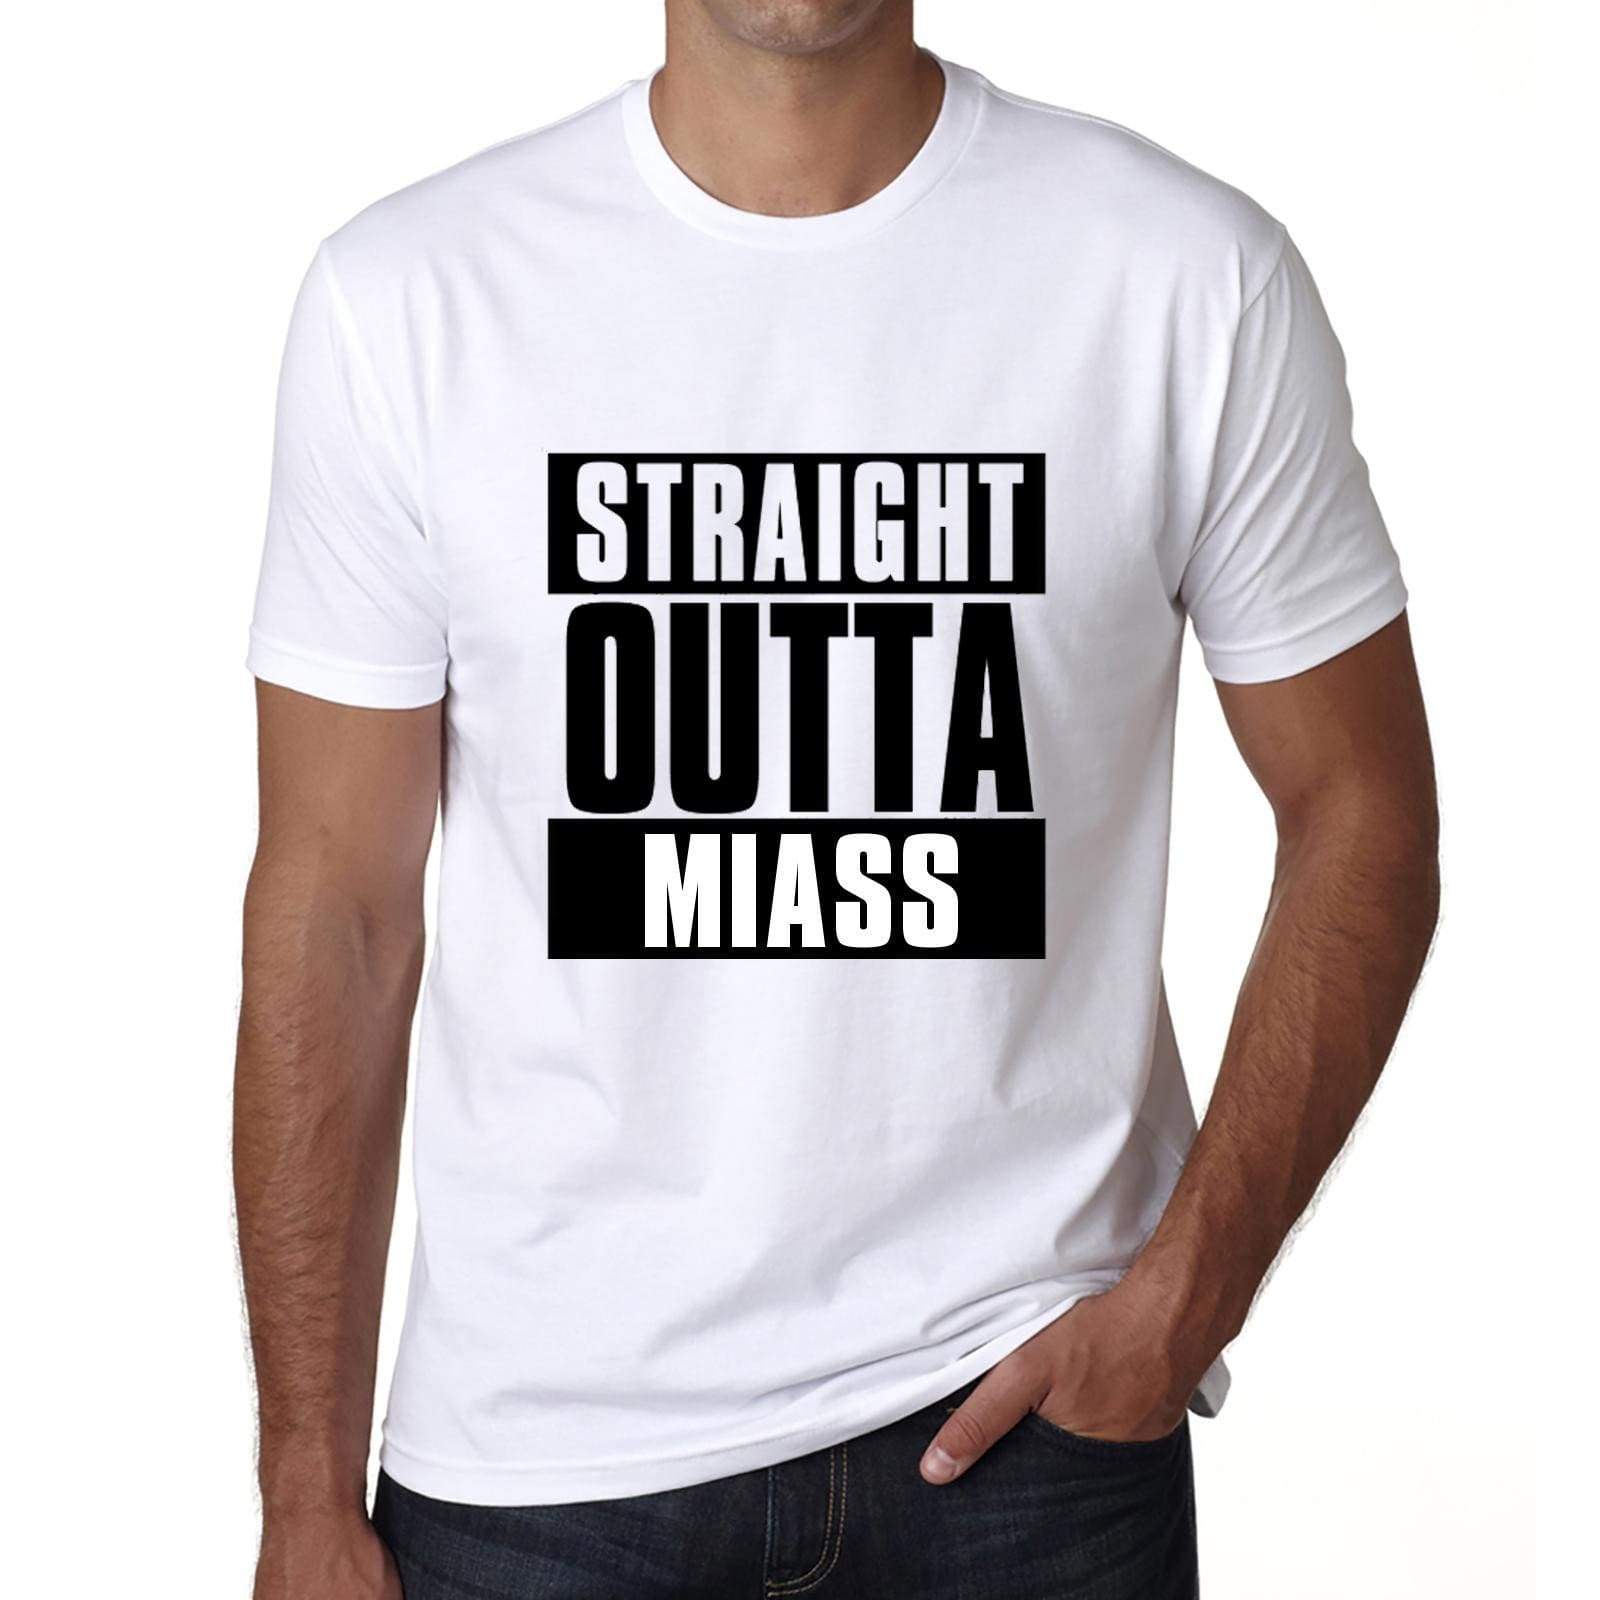 Straight Outta Miass Mens Short Sleeve Round Neck T-Shirt 00027 - White / S - Casual